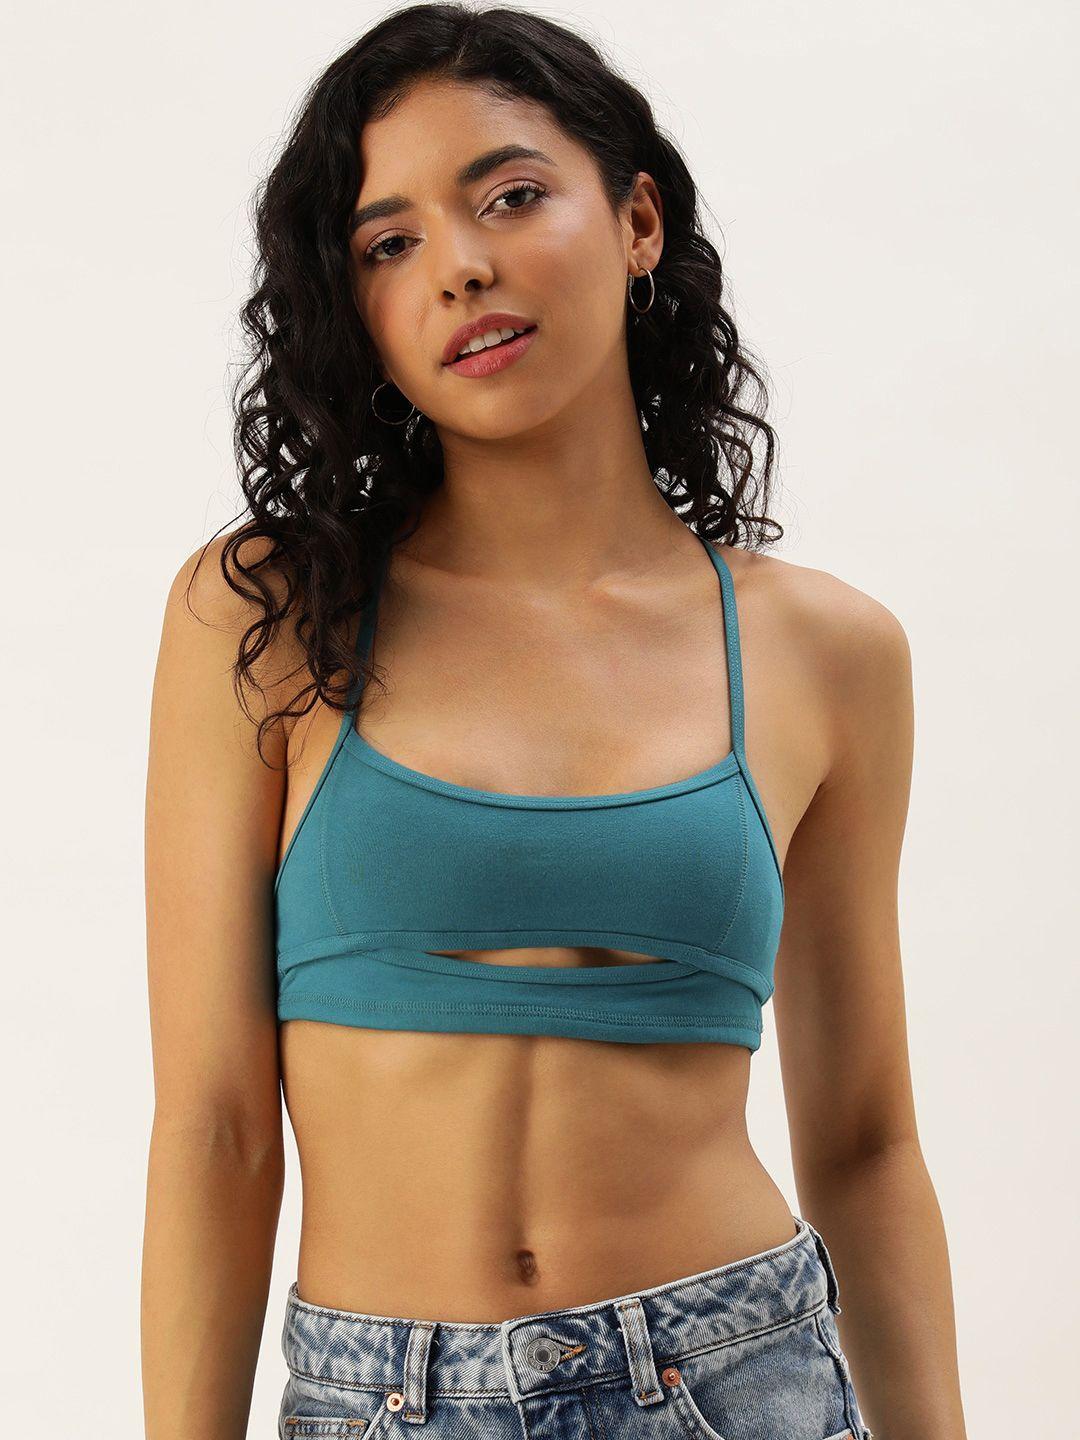 forever 21 shoulder straps styled back bralette crop top with cut-out detail on front